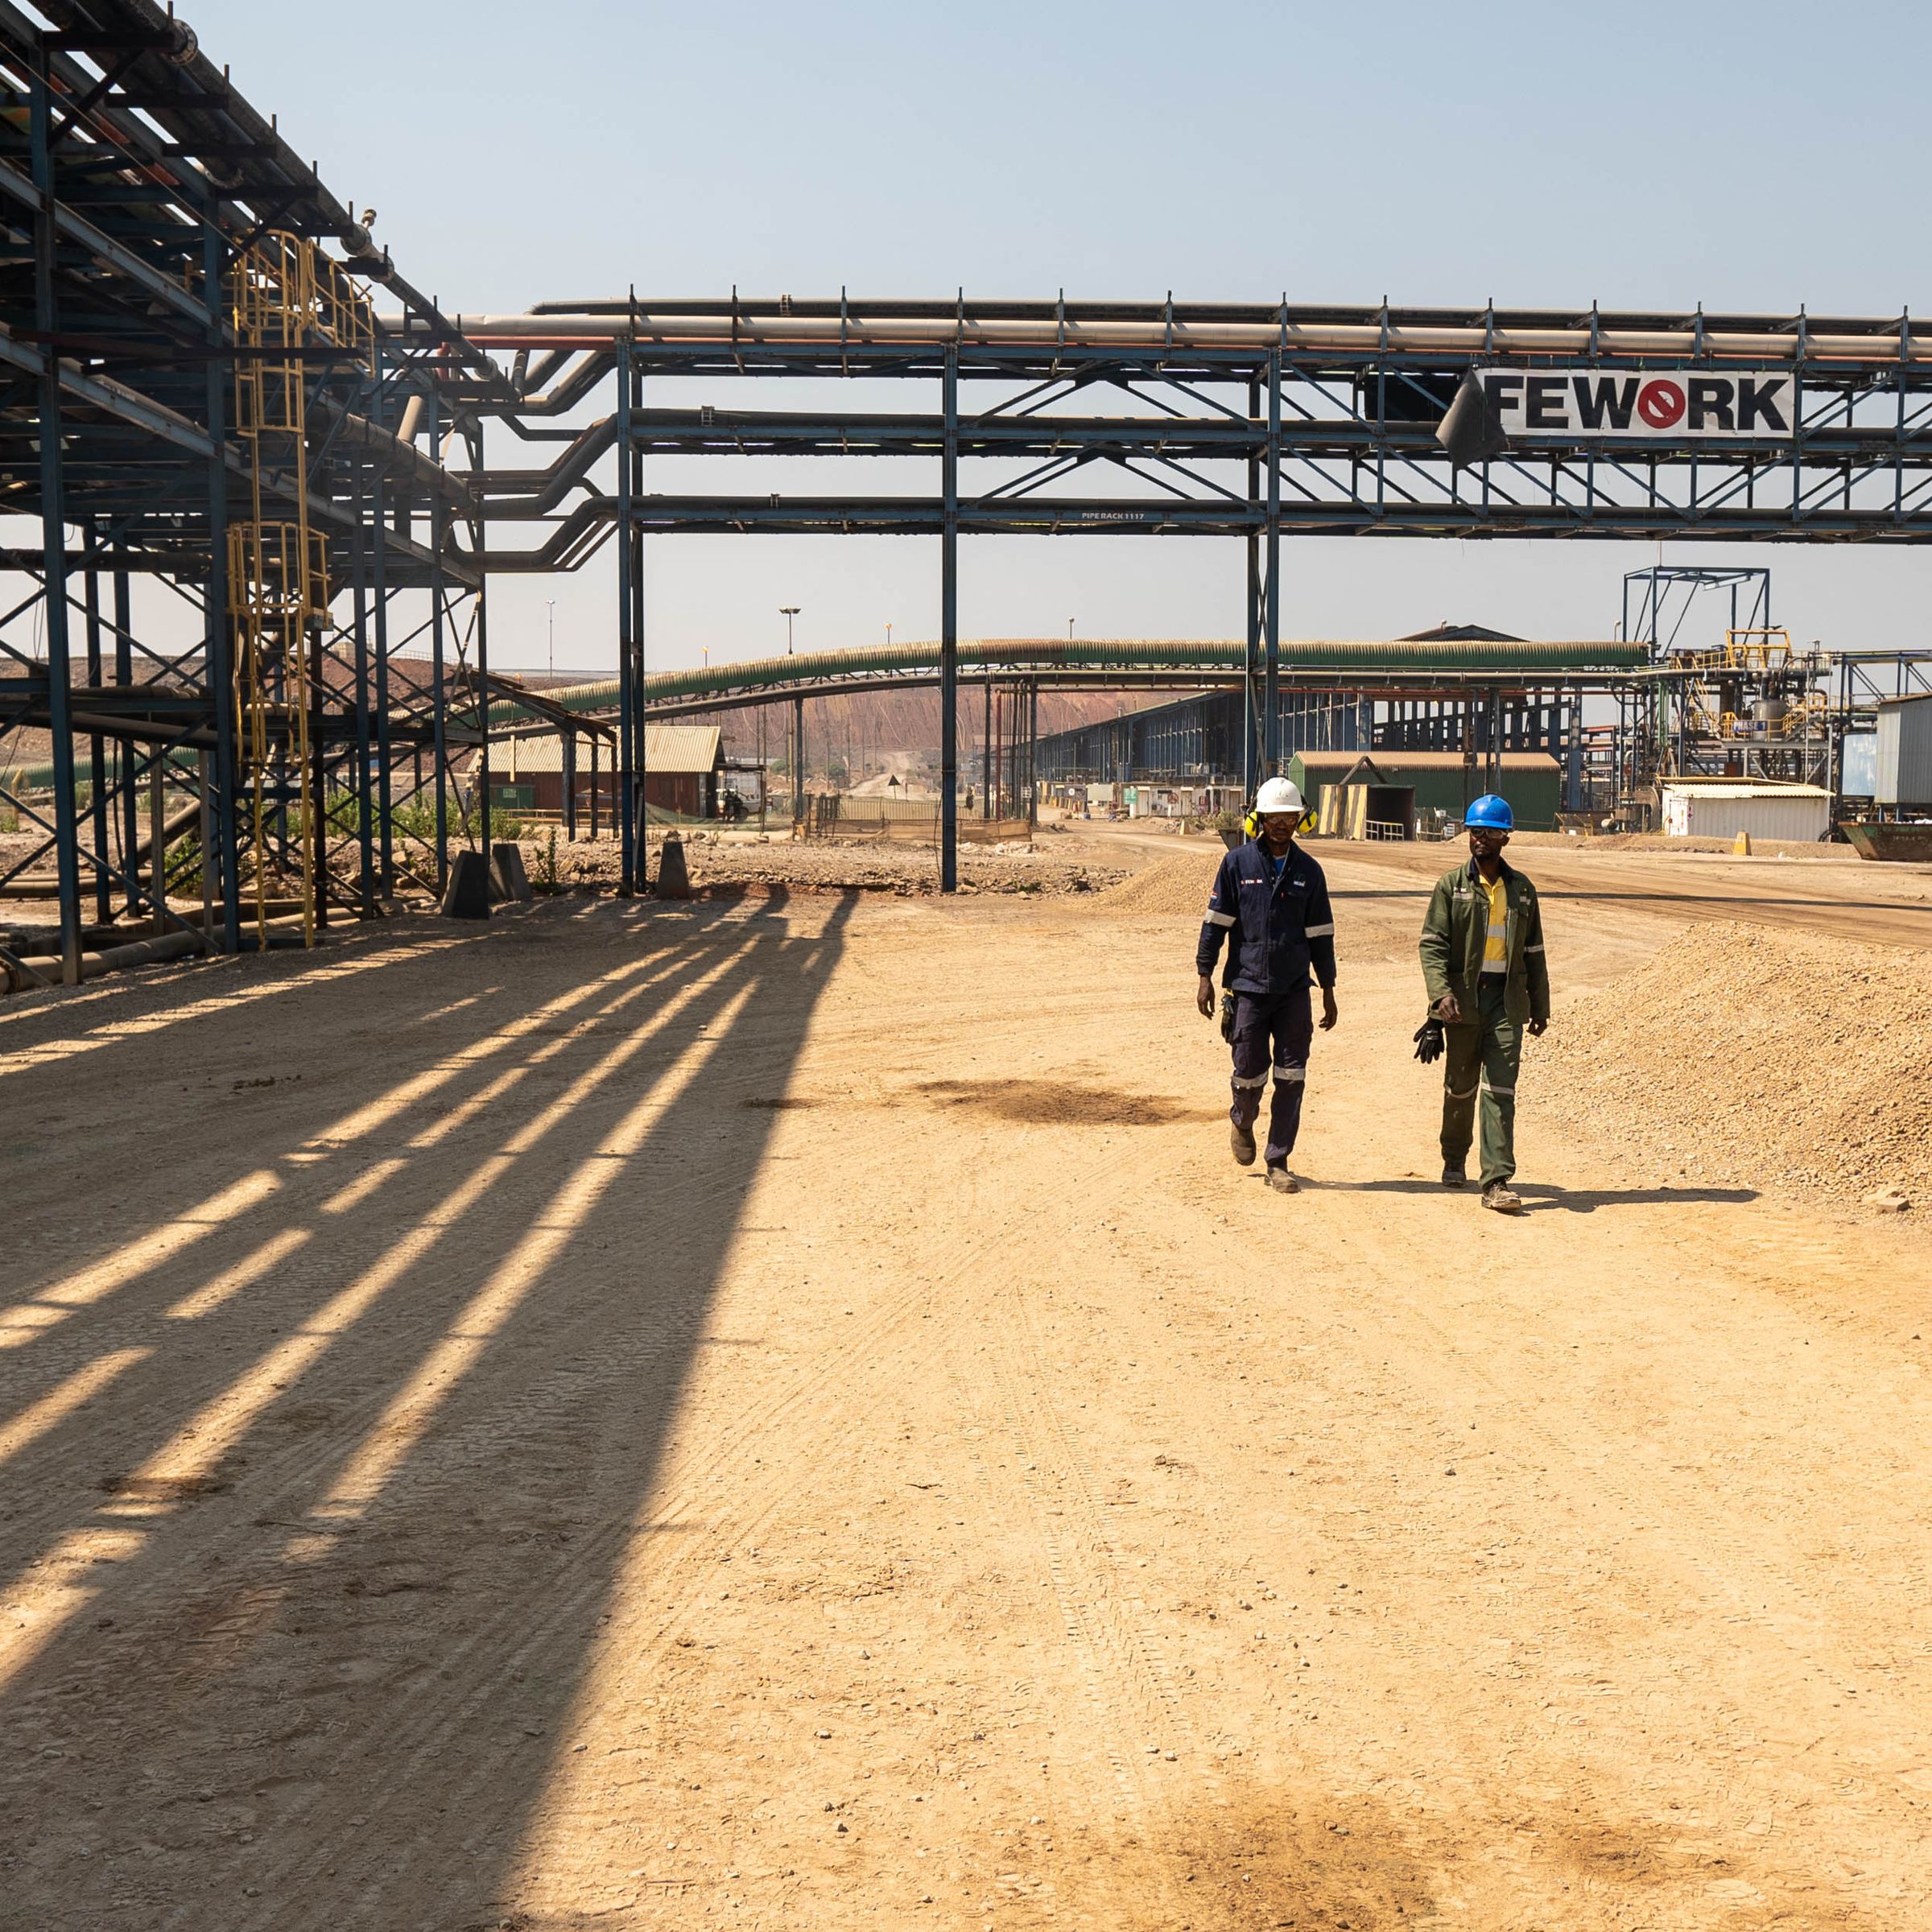 Two workers wearing hard hats walk through an industrial area.